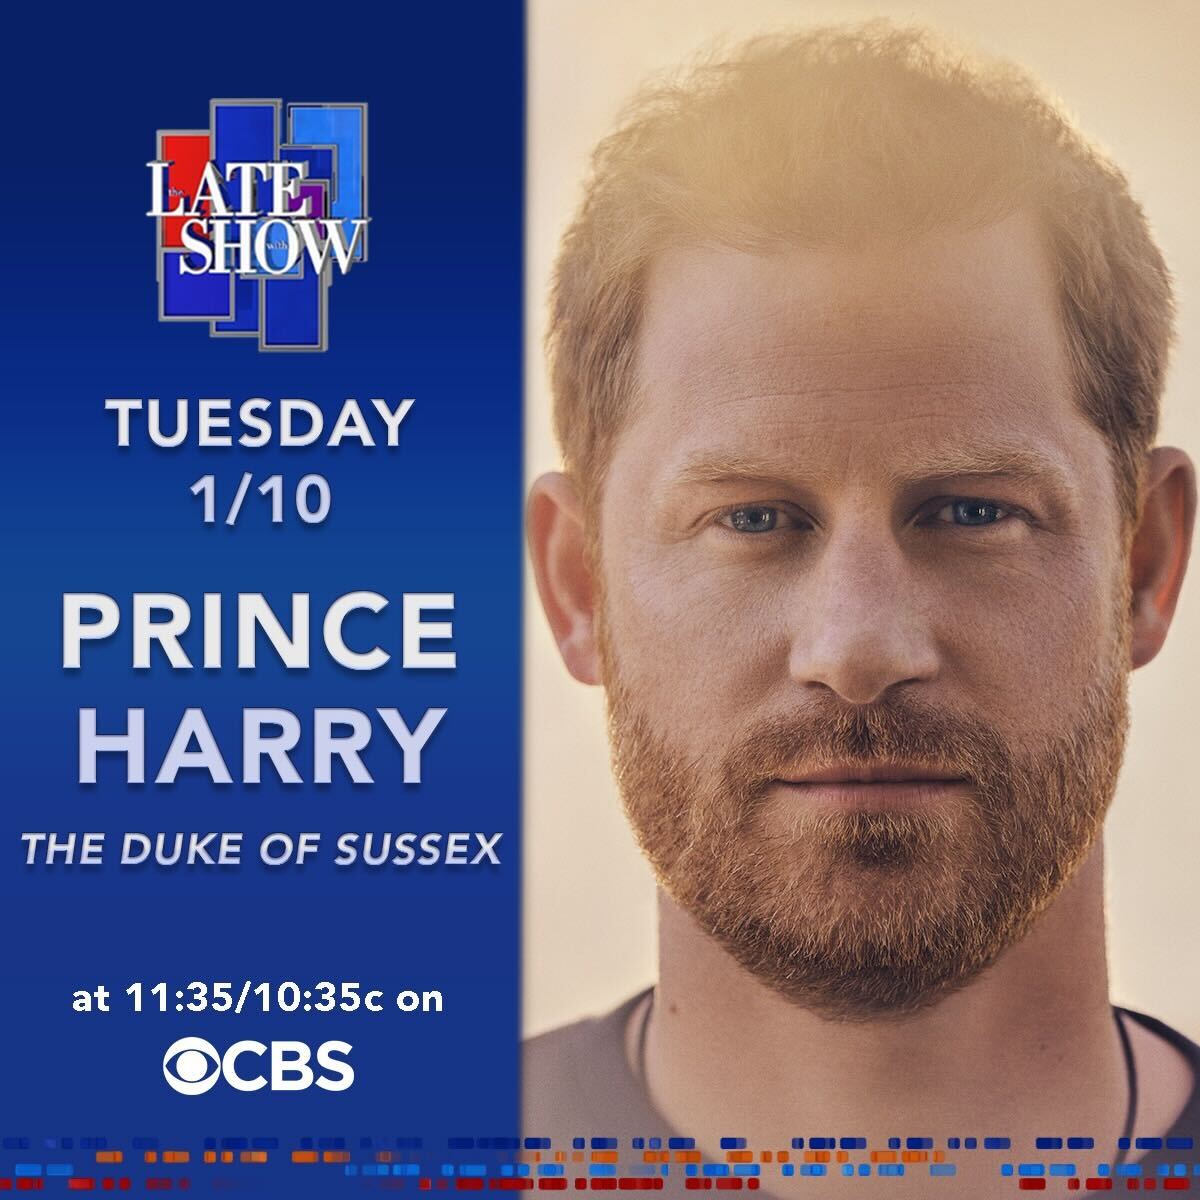 #BREAKING: Prince Harry, The Duke of Sussex, will join @StephenAtHome for an exclusive late night interview on #Colbert to discuss his new memoir, #Spare. Watch only on @CBS & @paramountplus on Tuesday, January 10th at 11:35/10:35c. bit.ly/3Z7OHbX